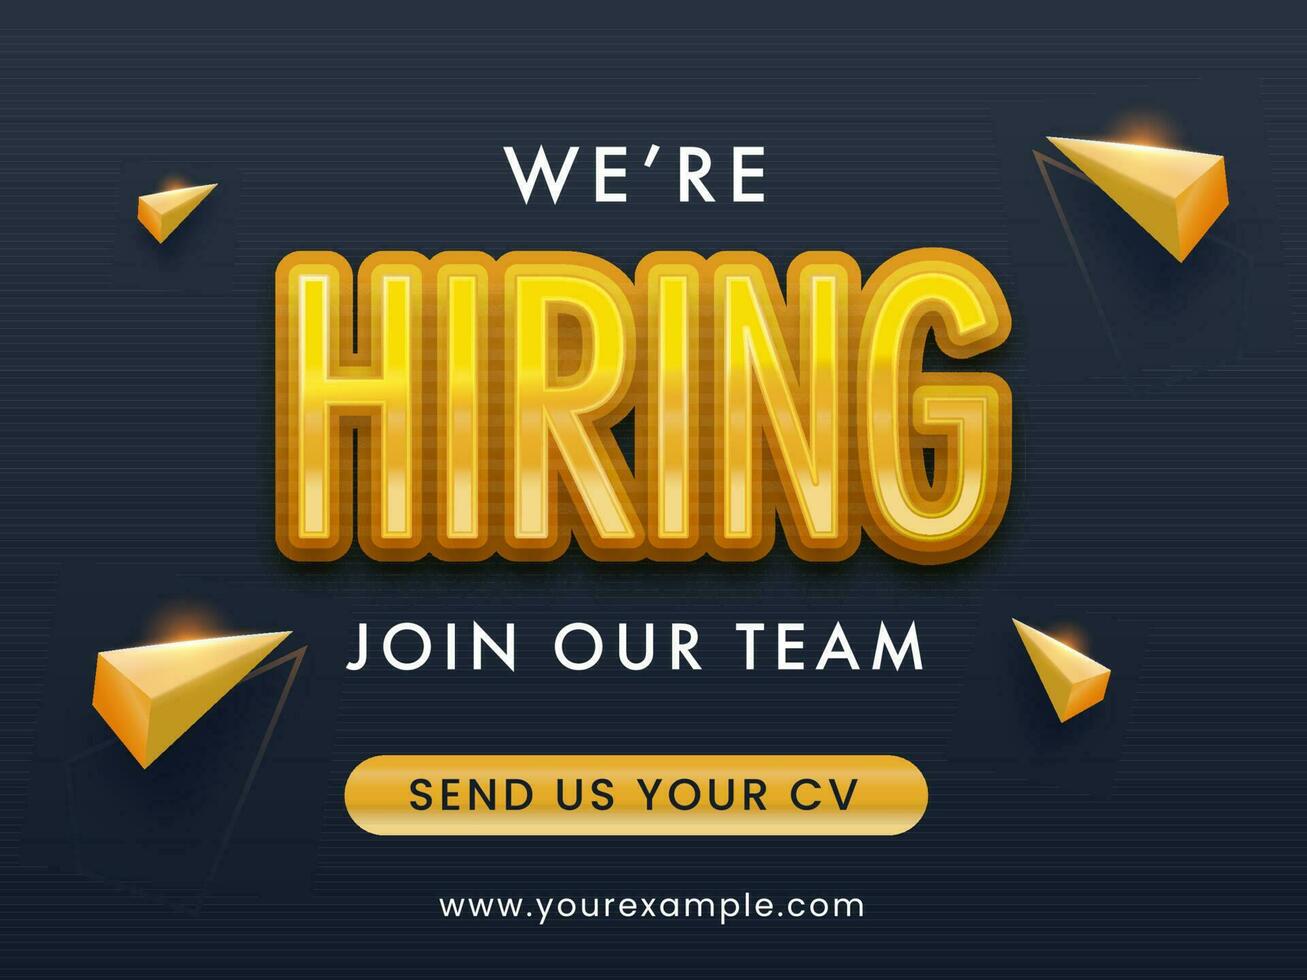 We're Hiring Join Our Team Text With 3D Golden Geometric Triangle Elements On Black Background. vector